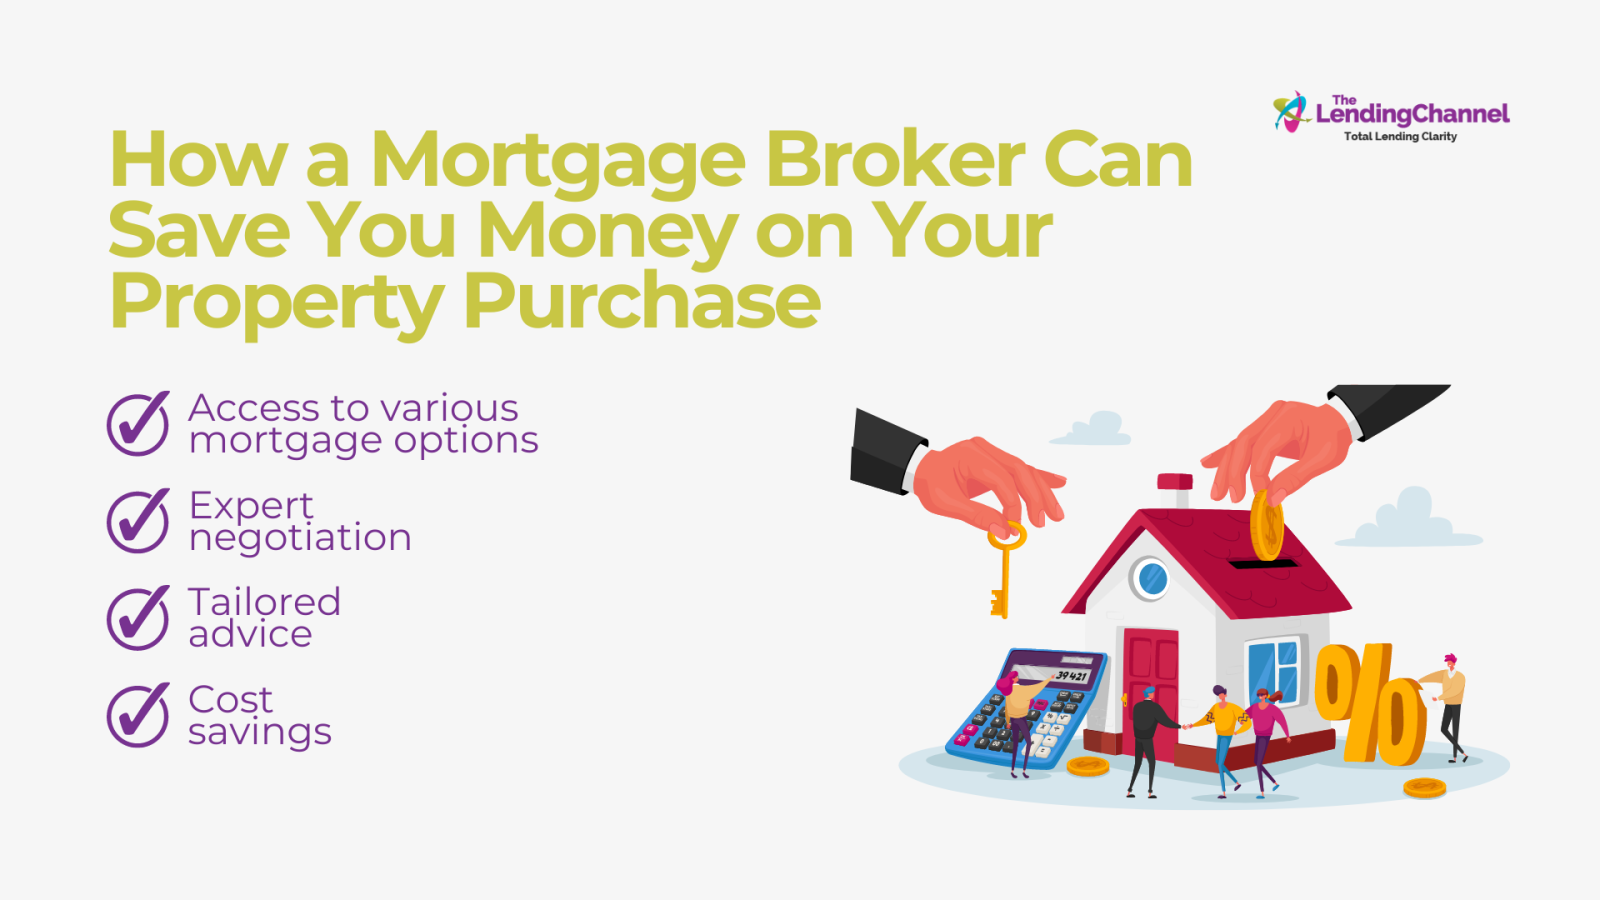 How a Mortgage Broker Can Save You Money on Your Property Purchase